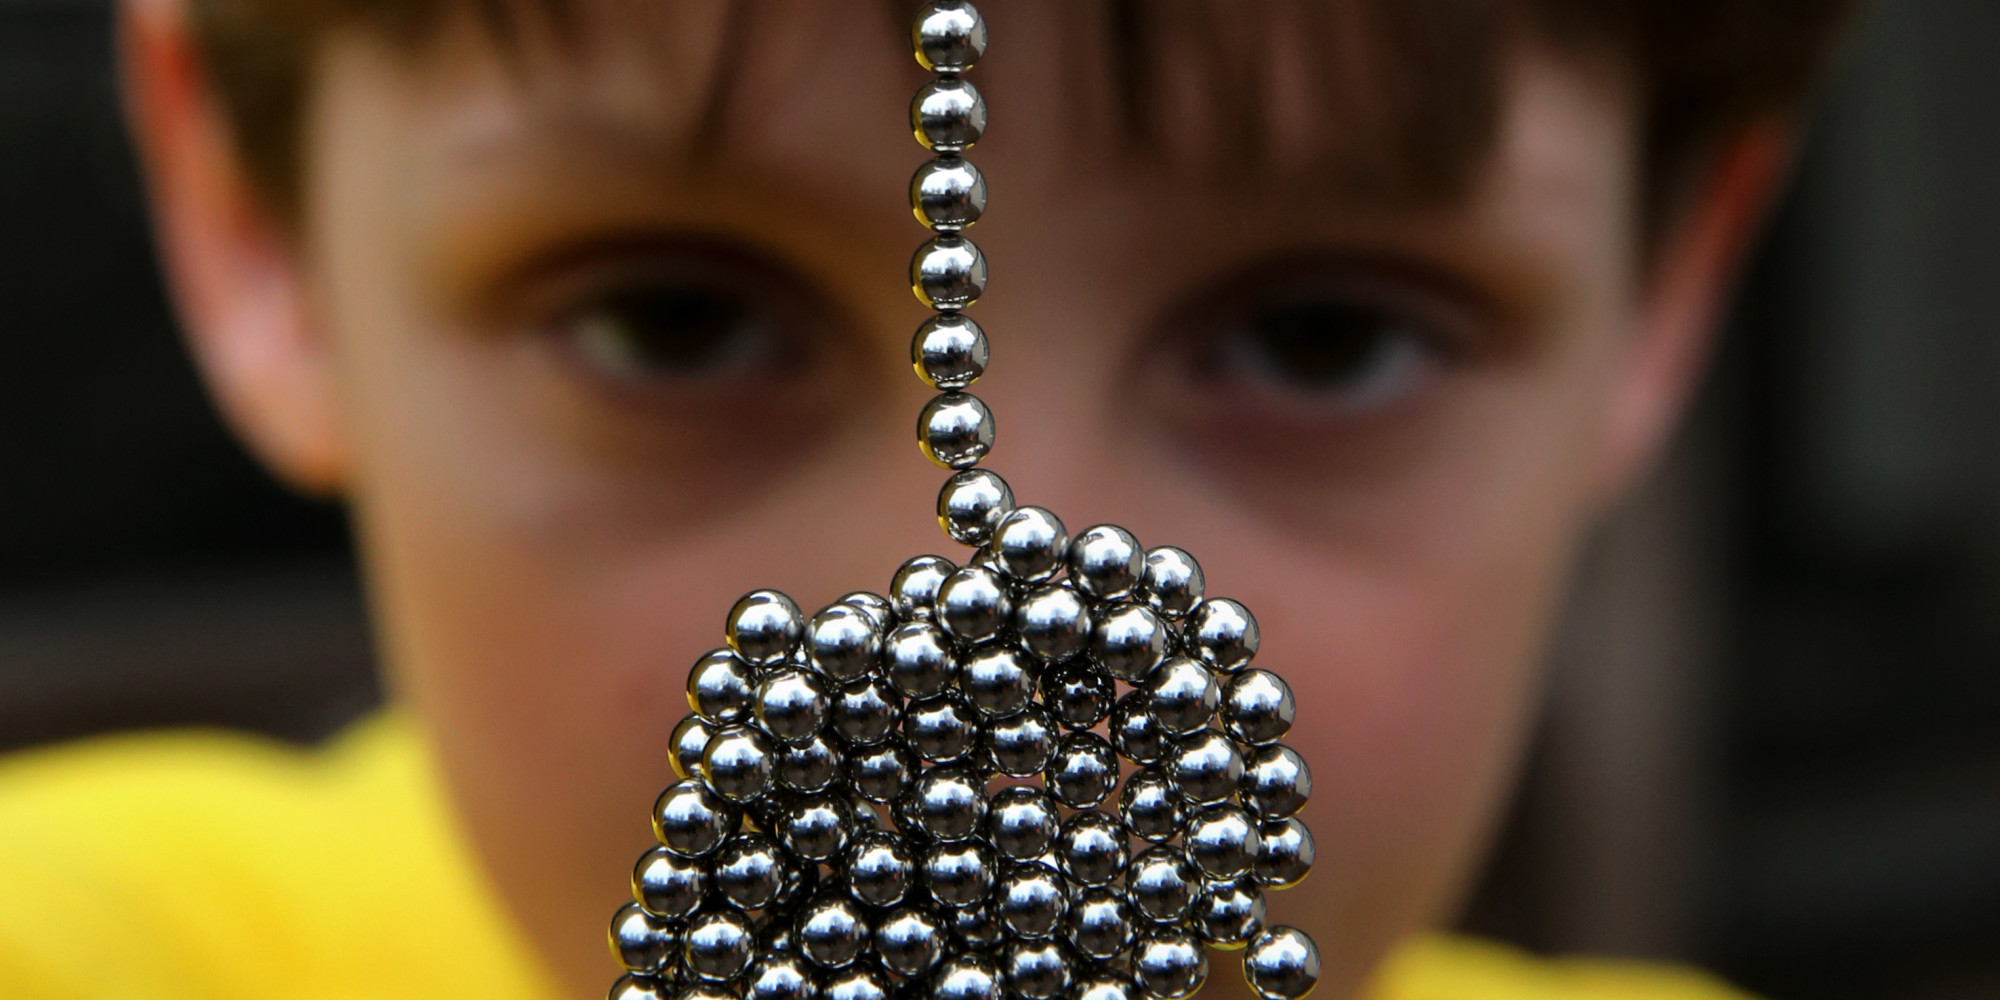 little magnetic balls toy